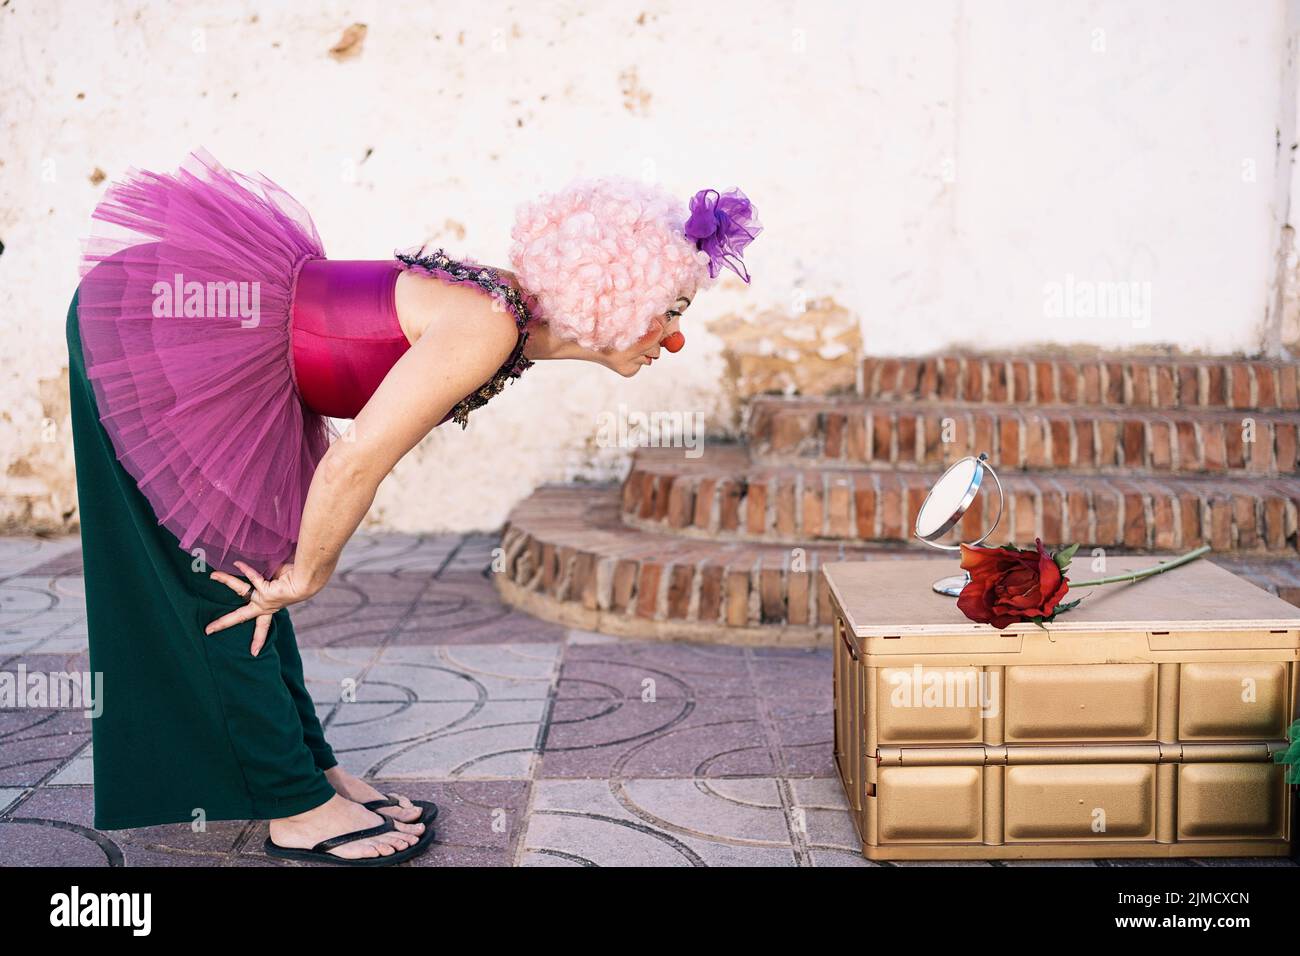 Side view of adult female artist in funny clown dress pink wig and nose leaning forward and looking in small round mirror before street performance Stock Photo